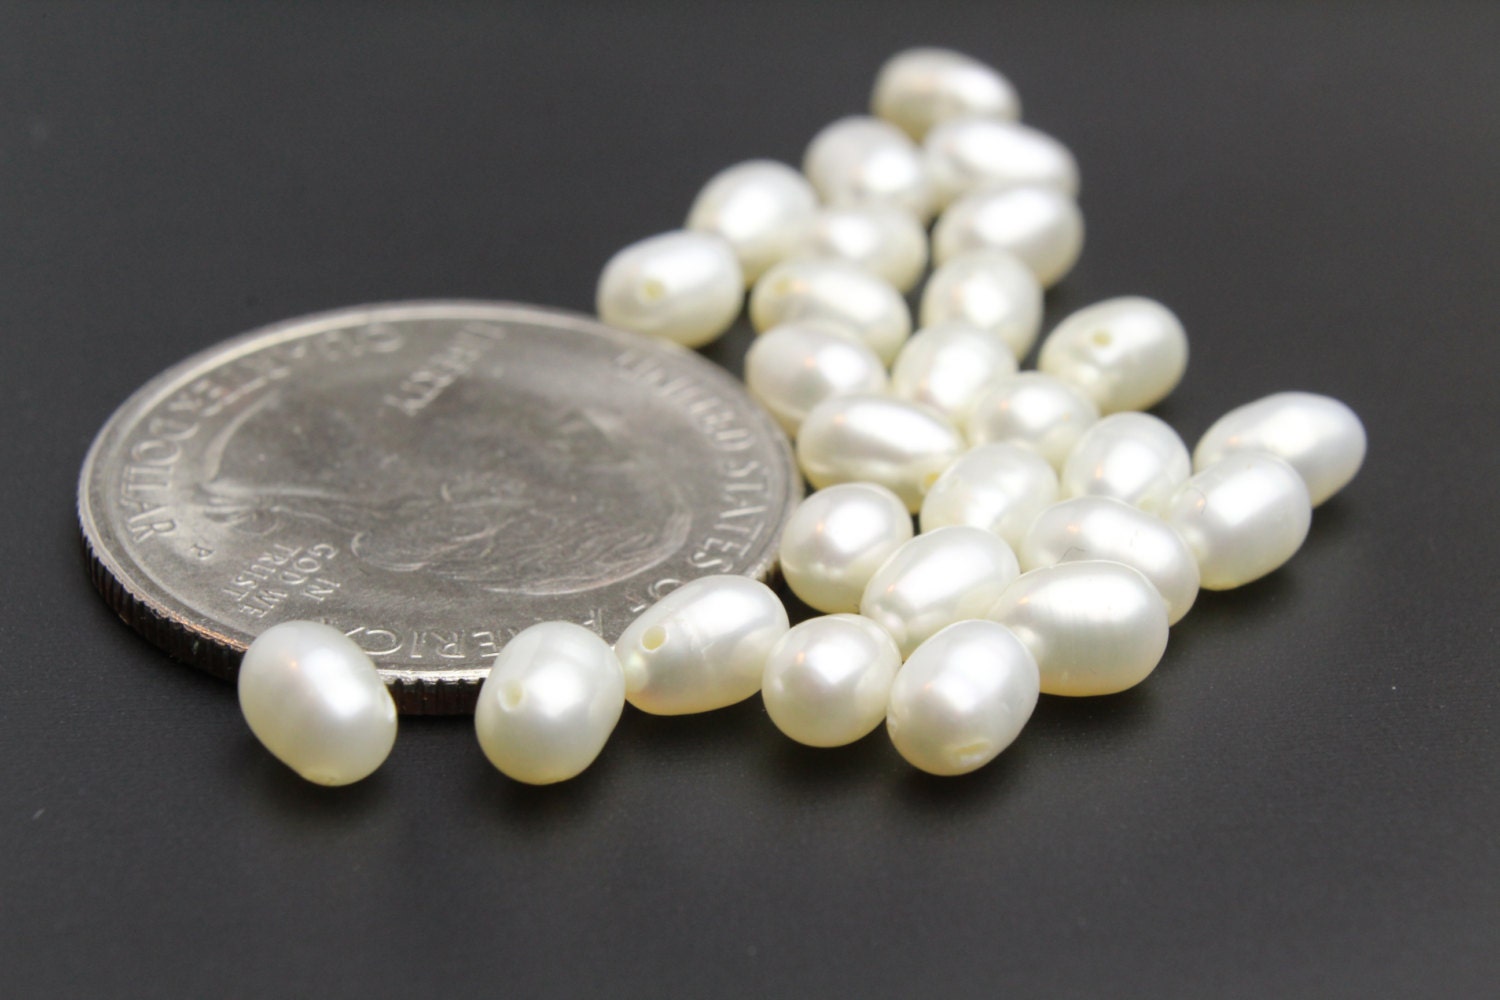 3.5-4mm AA Pearl Seed Beads, Genuine Freshwater Rice Pearls, Natural White  Oval Small Pearl Beads on Sale, High Quality Tiny Pearls FS800-WS 